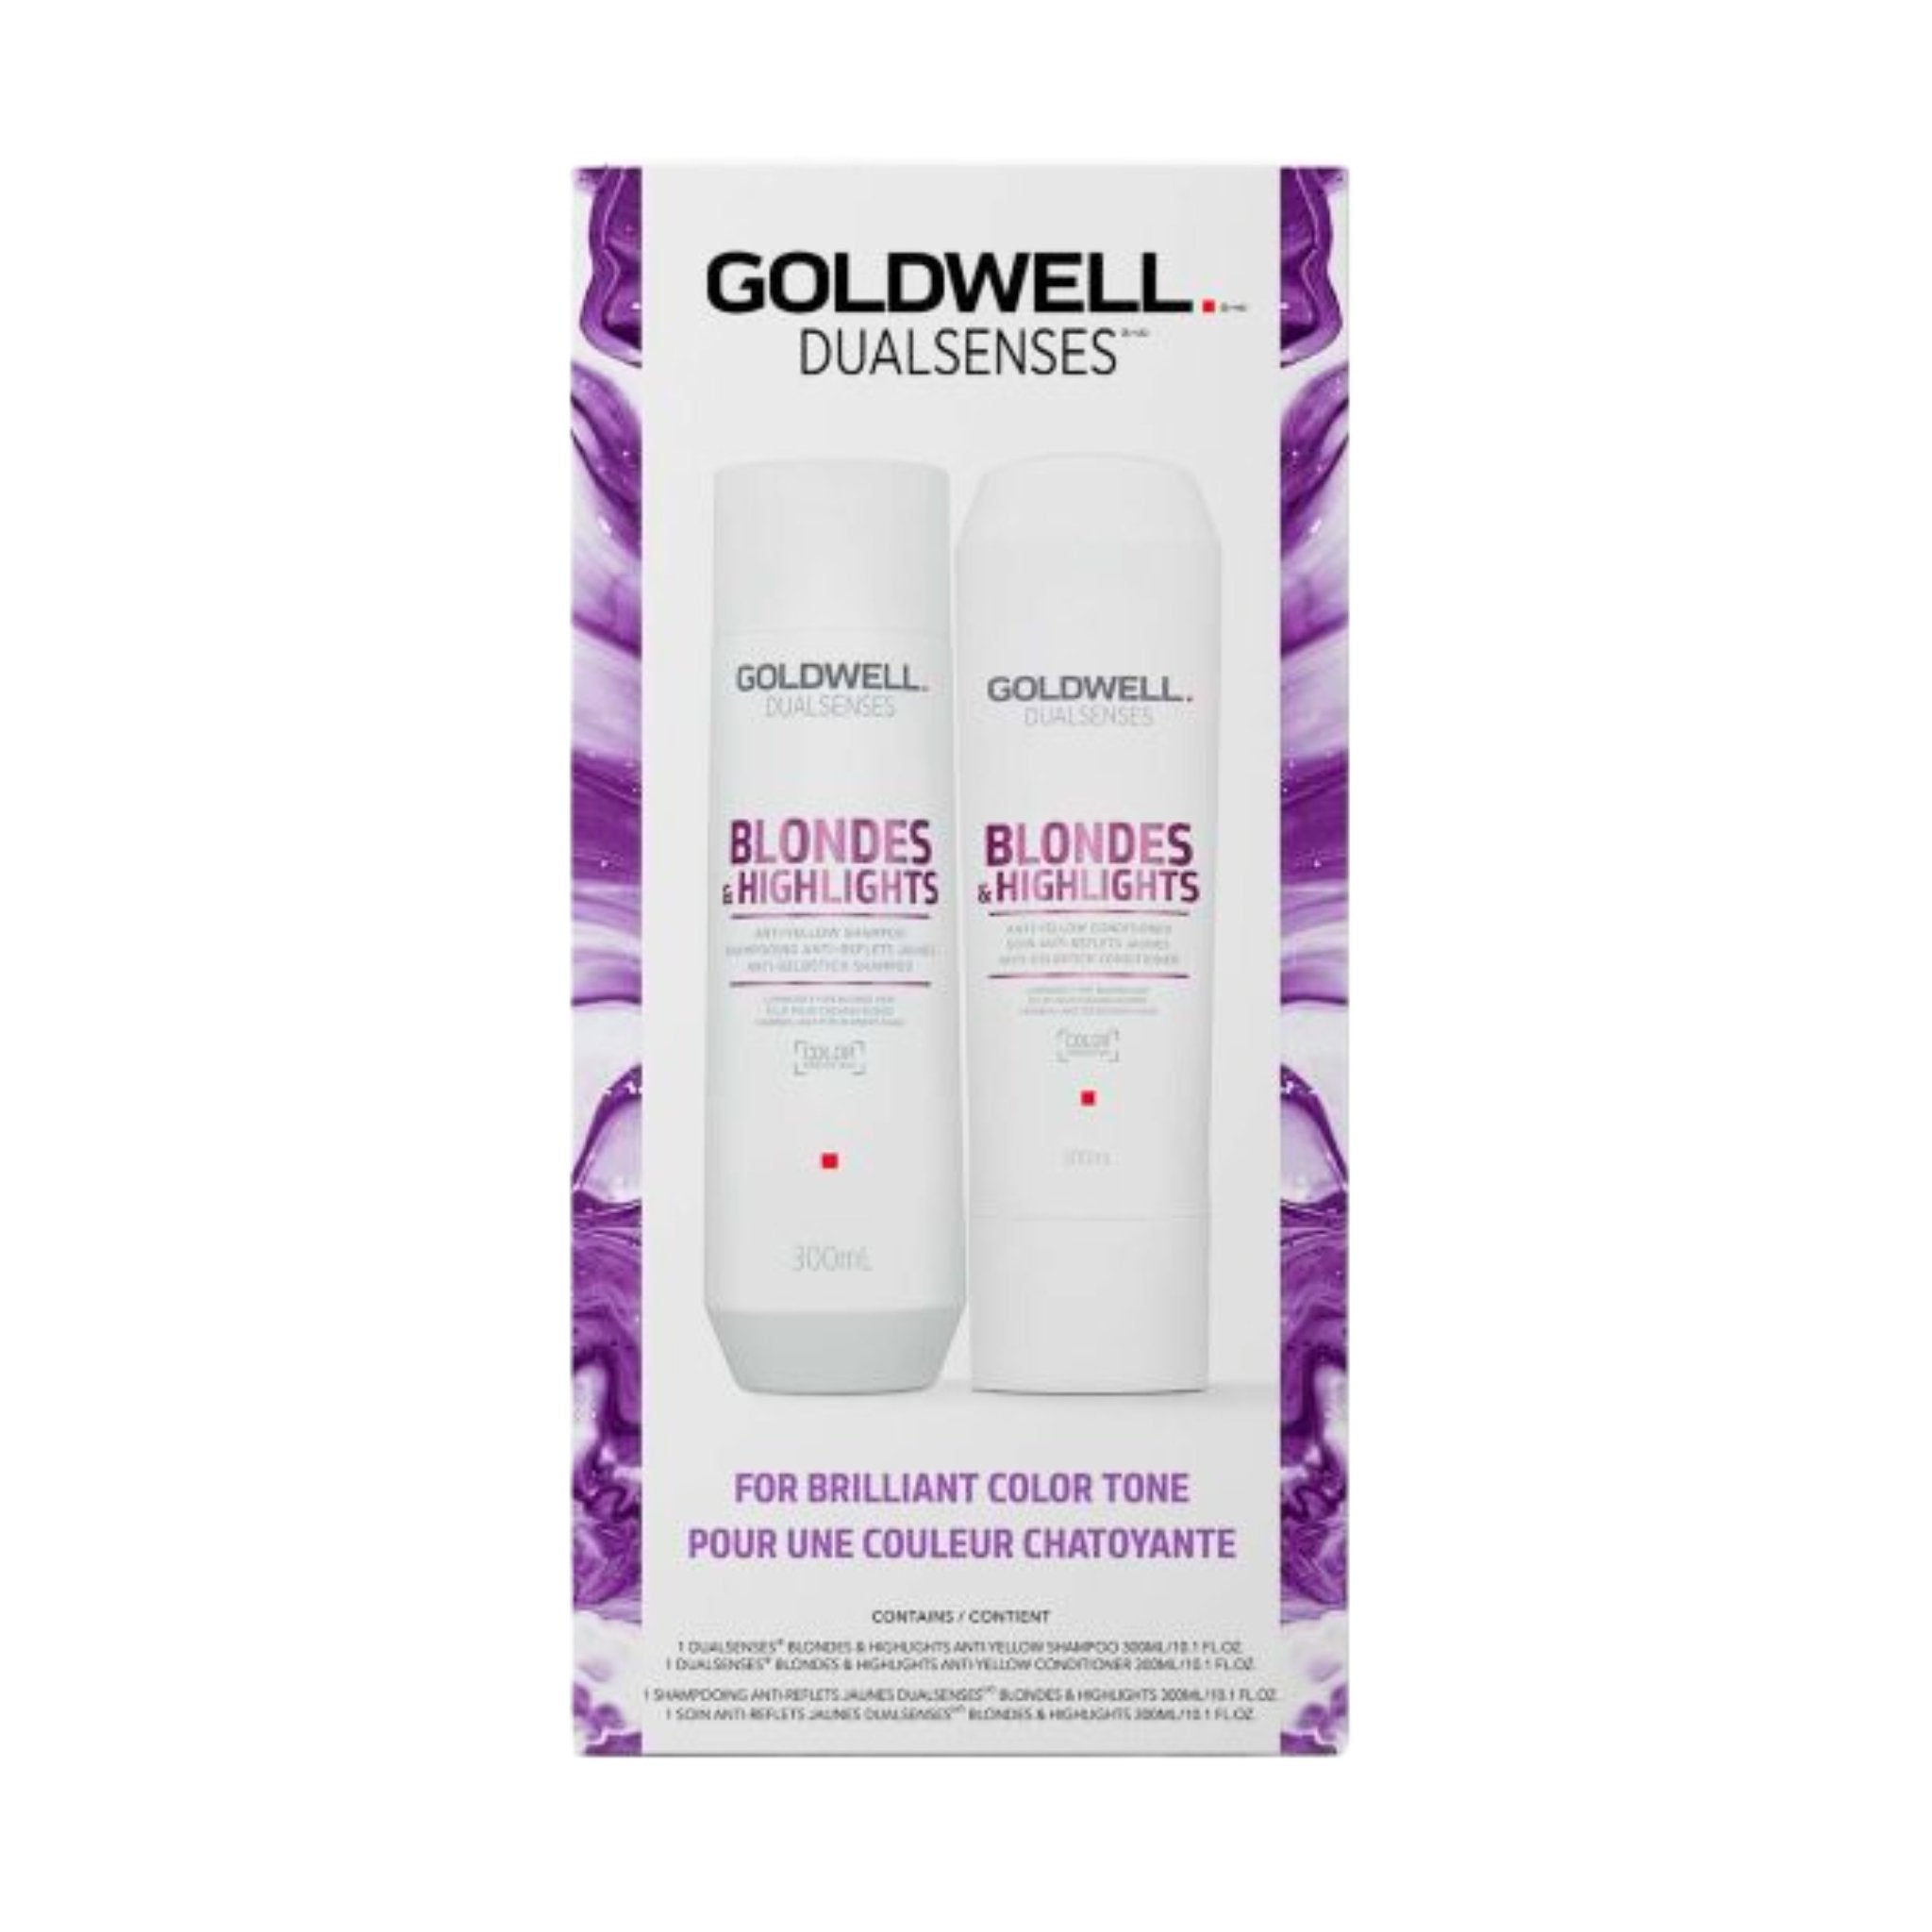 Goldwell. Duo Printanier Blondes & Highlights - Concept C. Shop